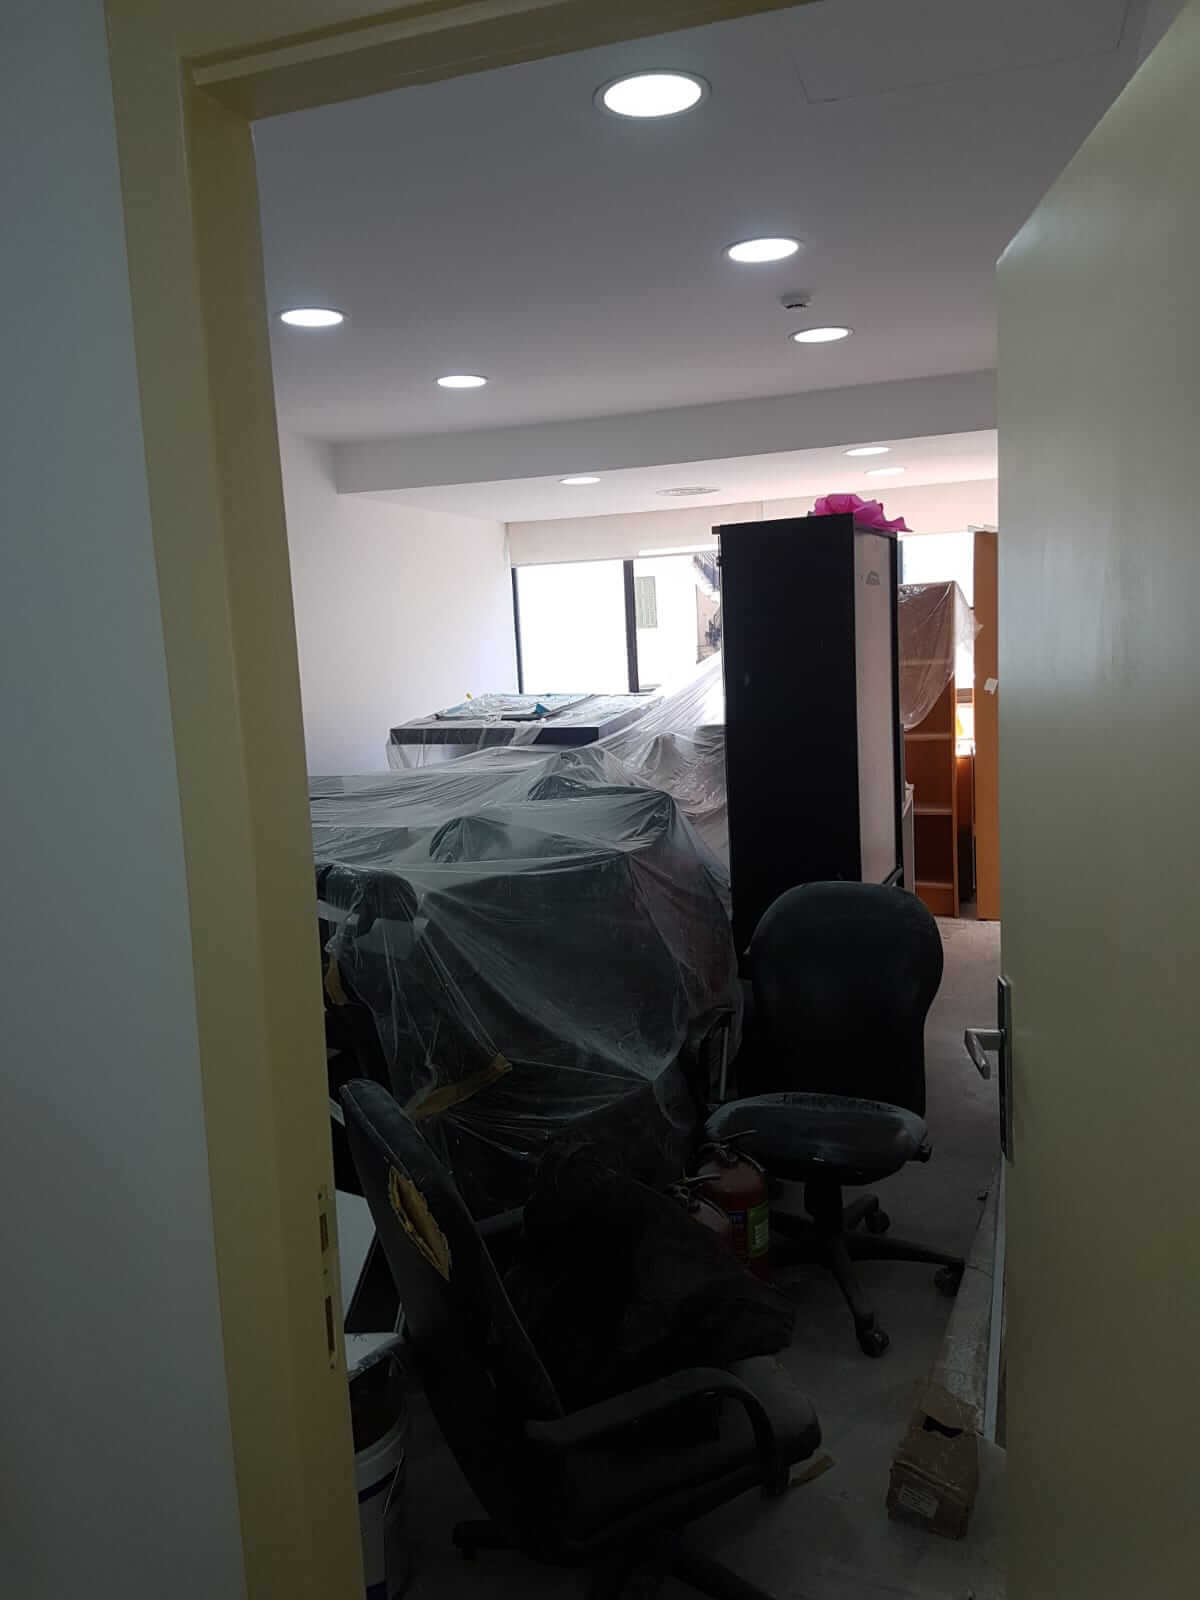 Renovation of Save the Children Office